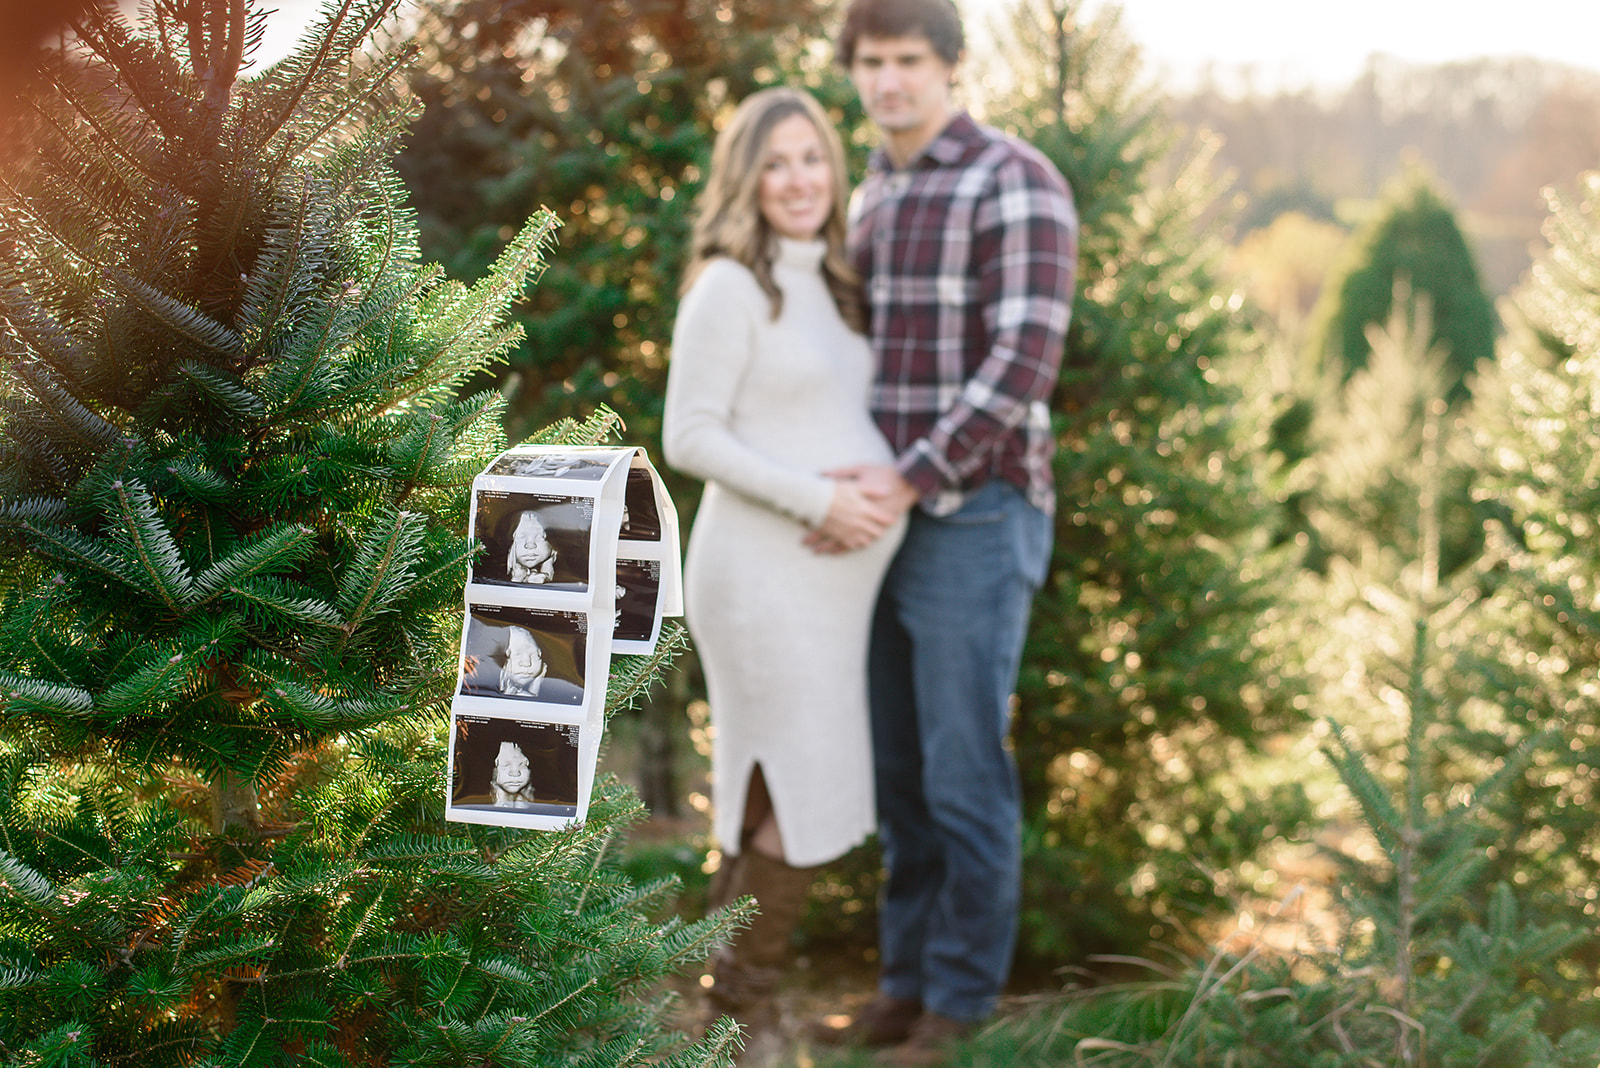 An ultrasound picture hangs on a Christmas tree during a maternity photoshoot with Rachel Mummert Photography